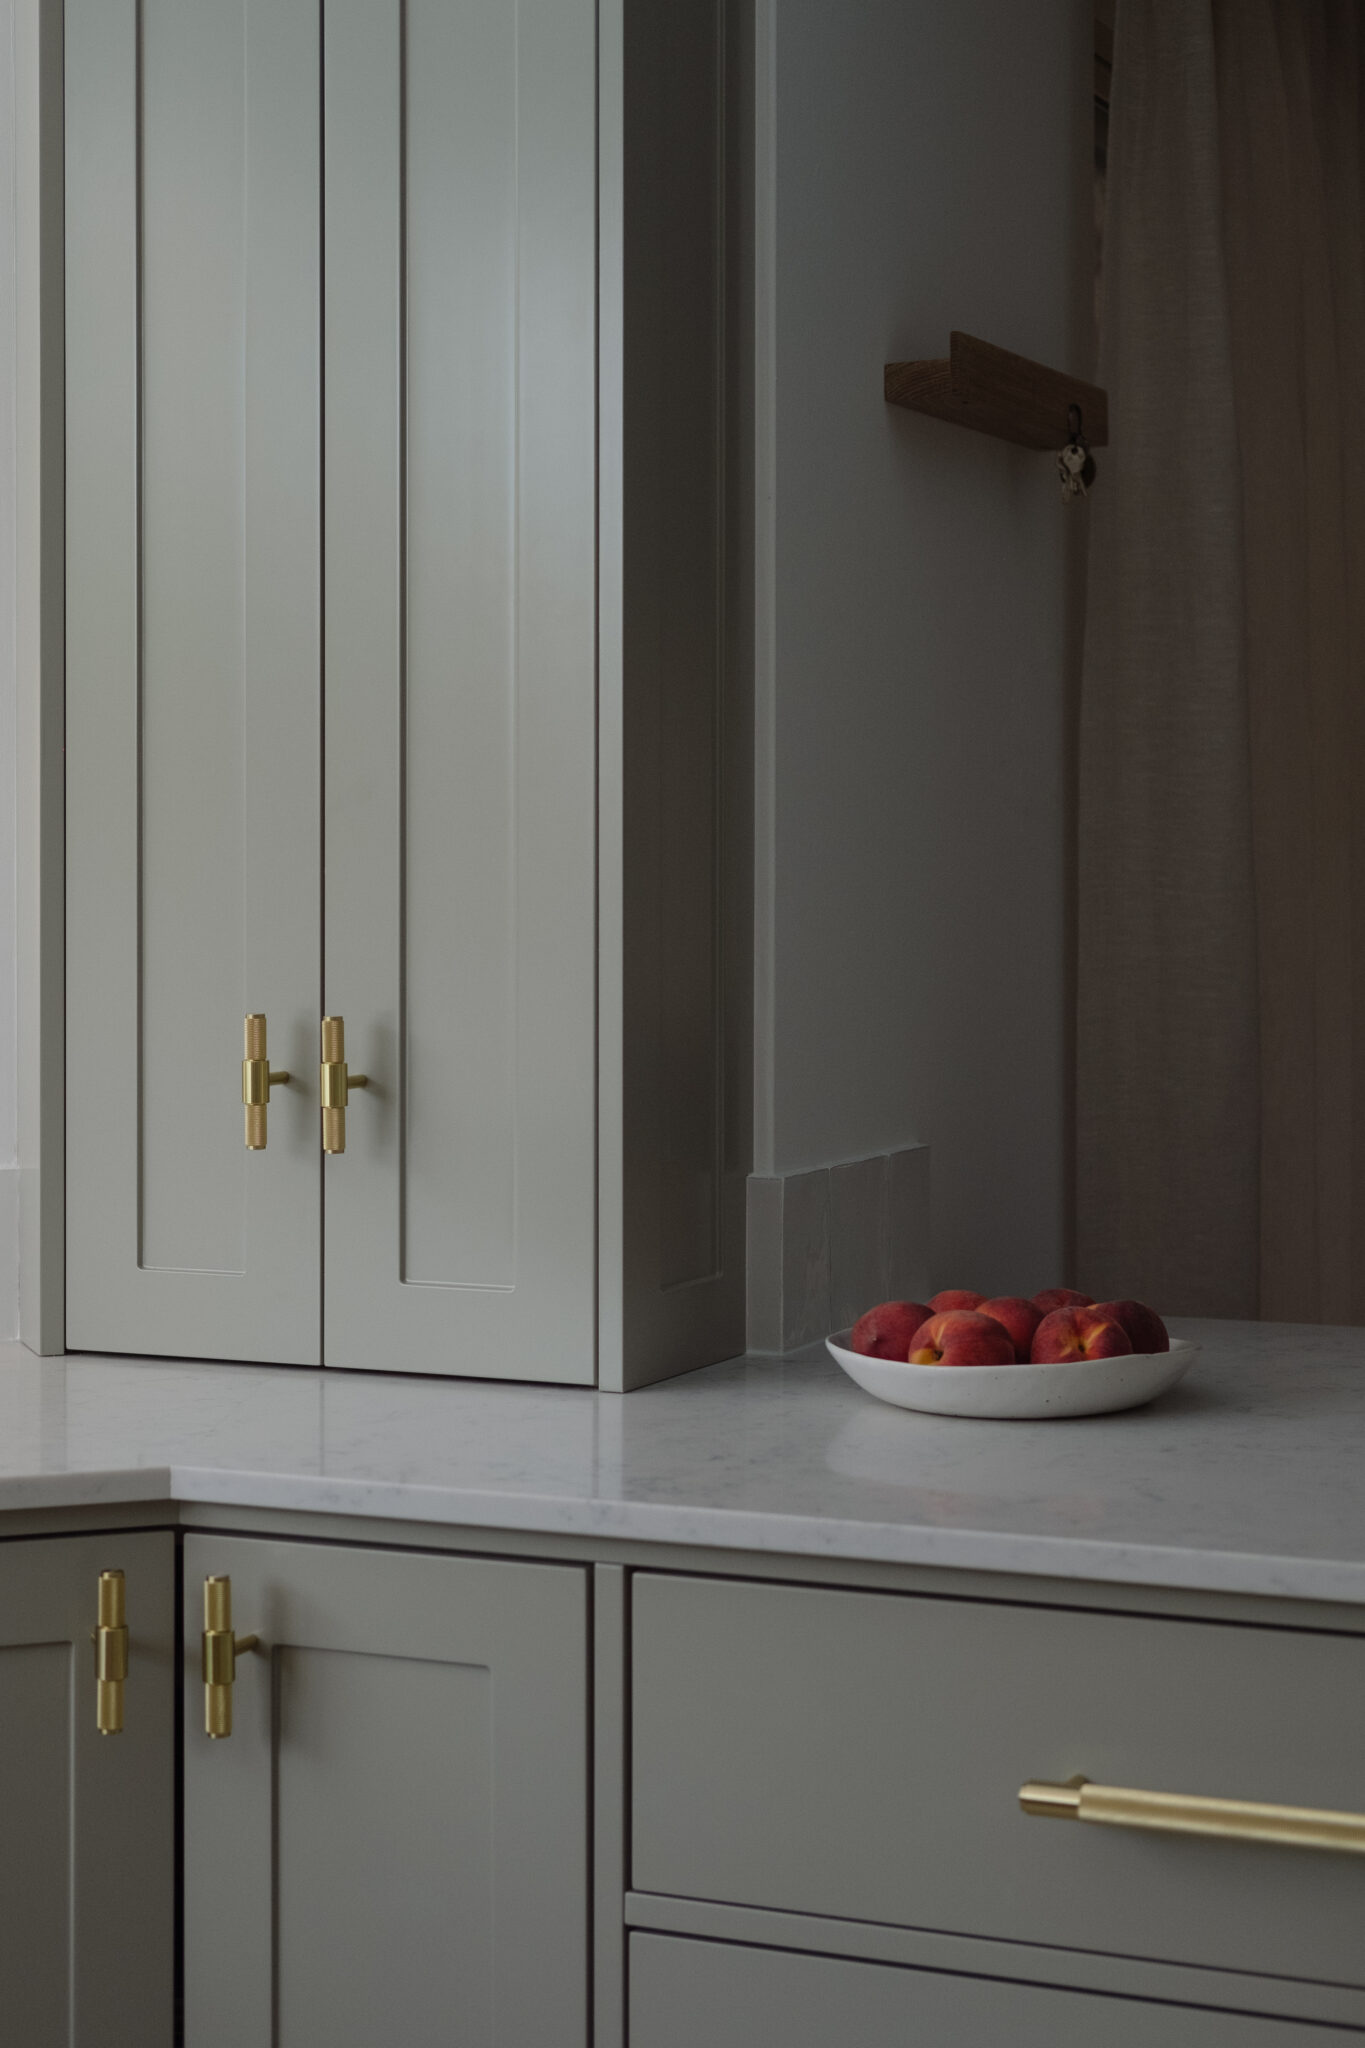 Warm grey kitchen with Brass details - Buster + Punch